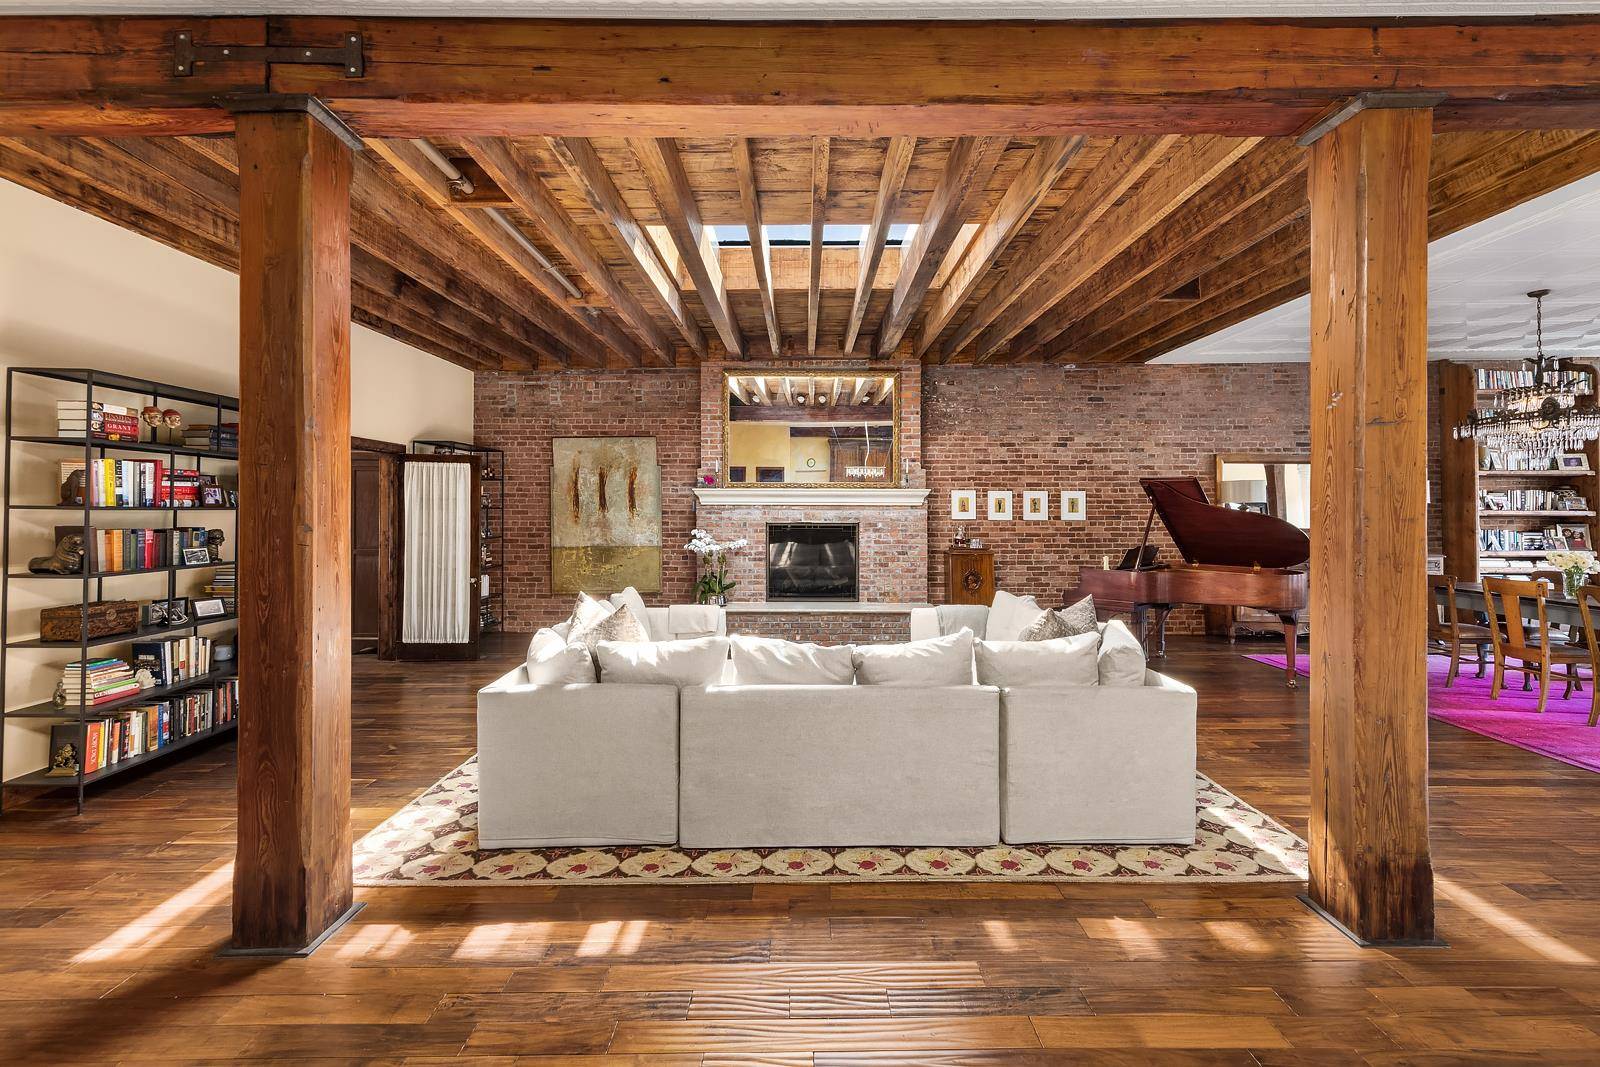 This one of a kind penthouse is a stunning 4 bedroom, 3 bath loft with private roof deck perched atop an intimate and historic Tribeca building.